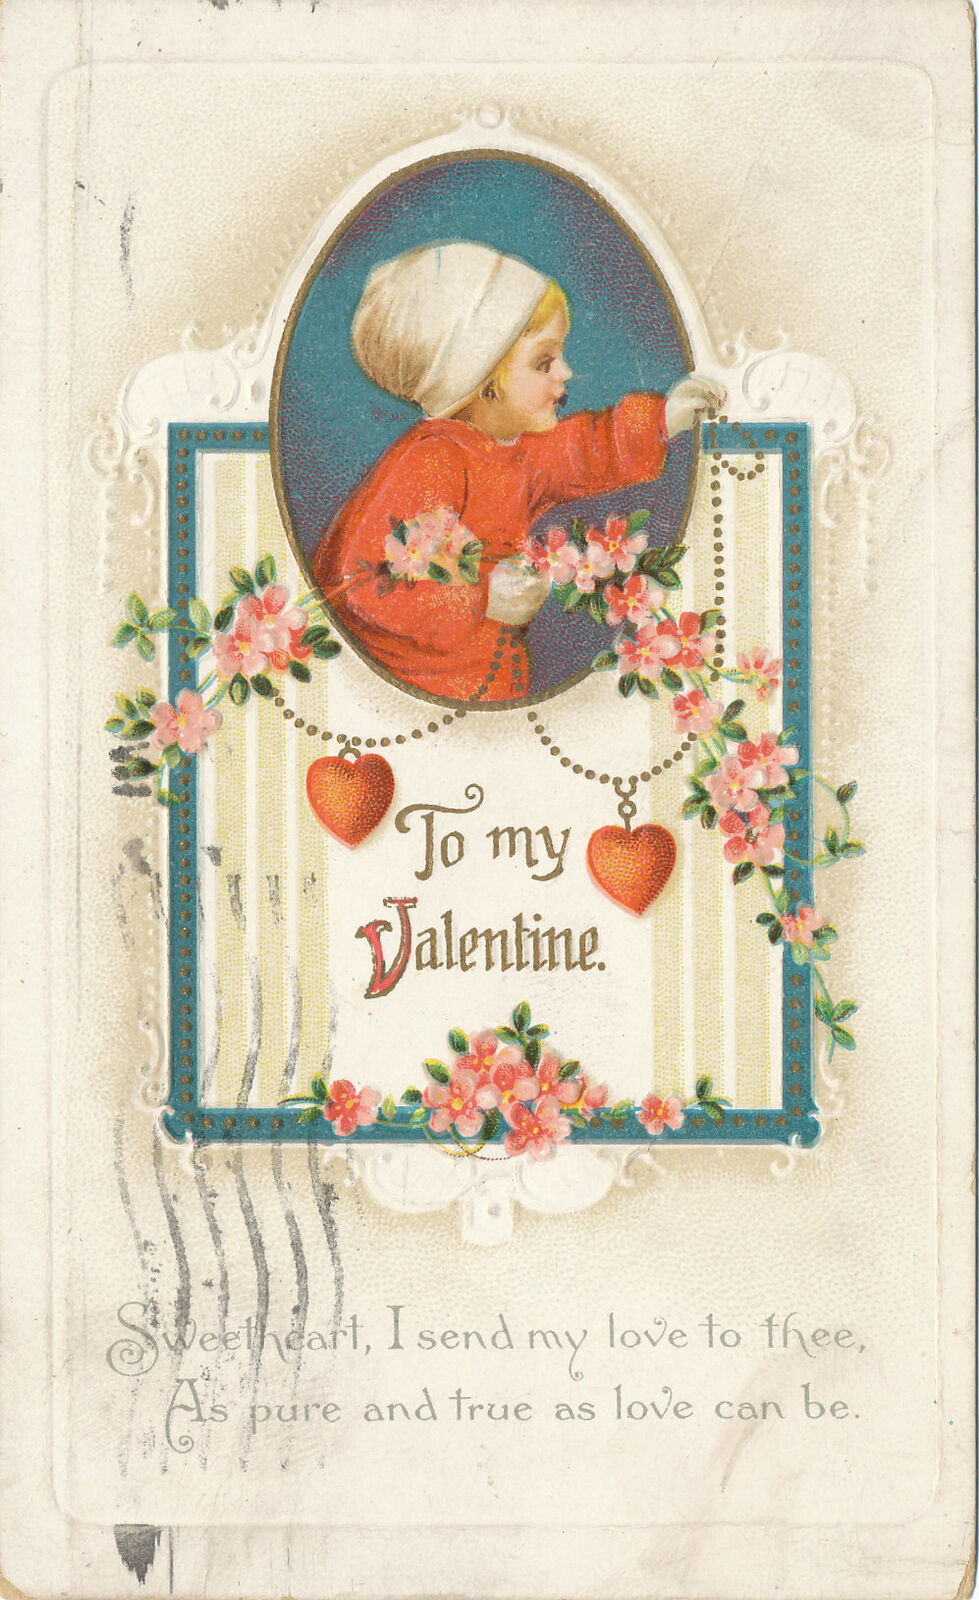 TO MY VALENTINE - Postcard 1916 - CHILD HANGING STRING OF HEARTS AND FLOWERS